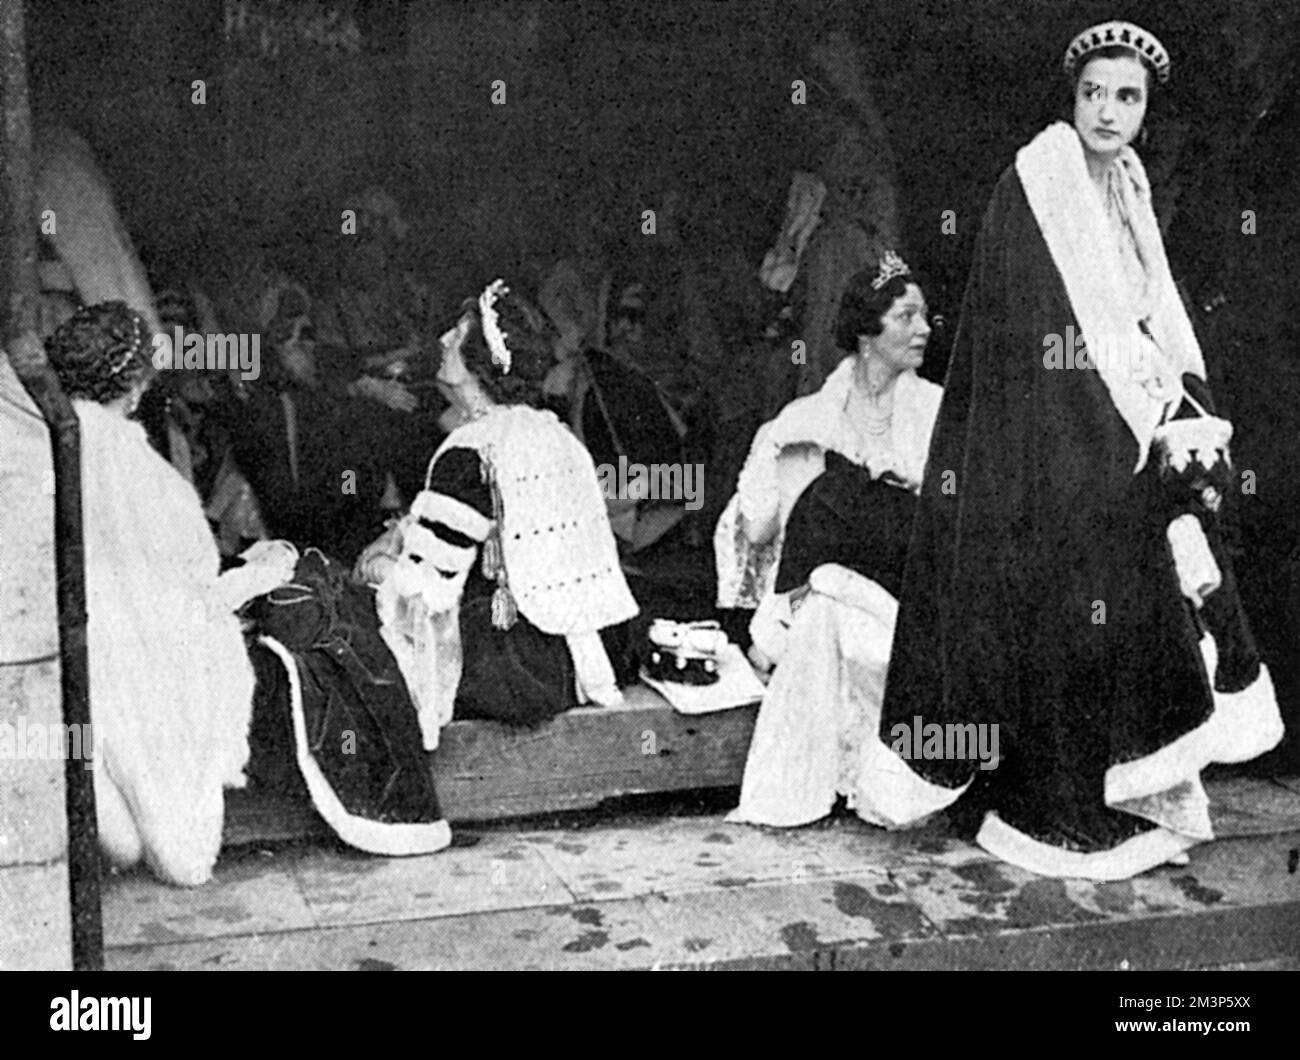 The Duchess of Leeds and the Countess of Annesley watching hopefully for their cars to arrive following the Coronation of King George VI at Westminster Abbey on 12 May 1937, while other peeresses turn their backs in resignation.  A torrential downpour afterwards meant that a large proportion of the 7500 guests at Westminster Abbey were left stranded waiting for cars up to five hours after the event had finished.       Date: 1937 Stock Photo